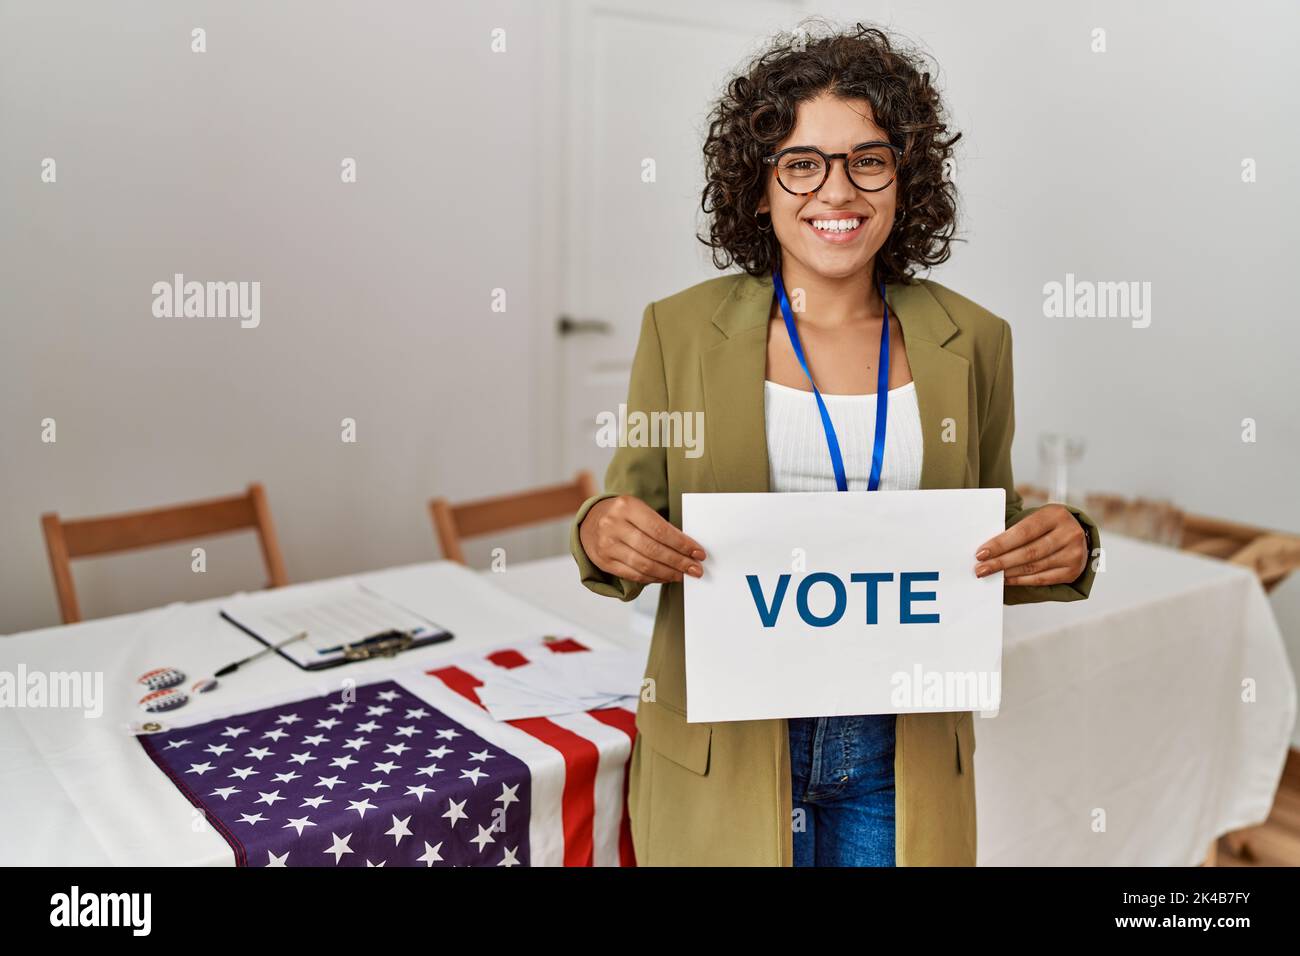 Young hispanic woman smiling confident holding vote banner at electoral college Stock Photo